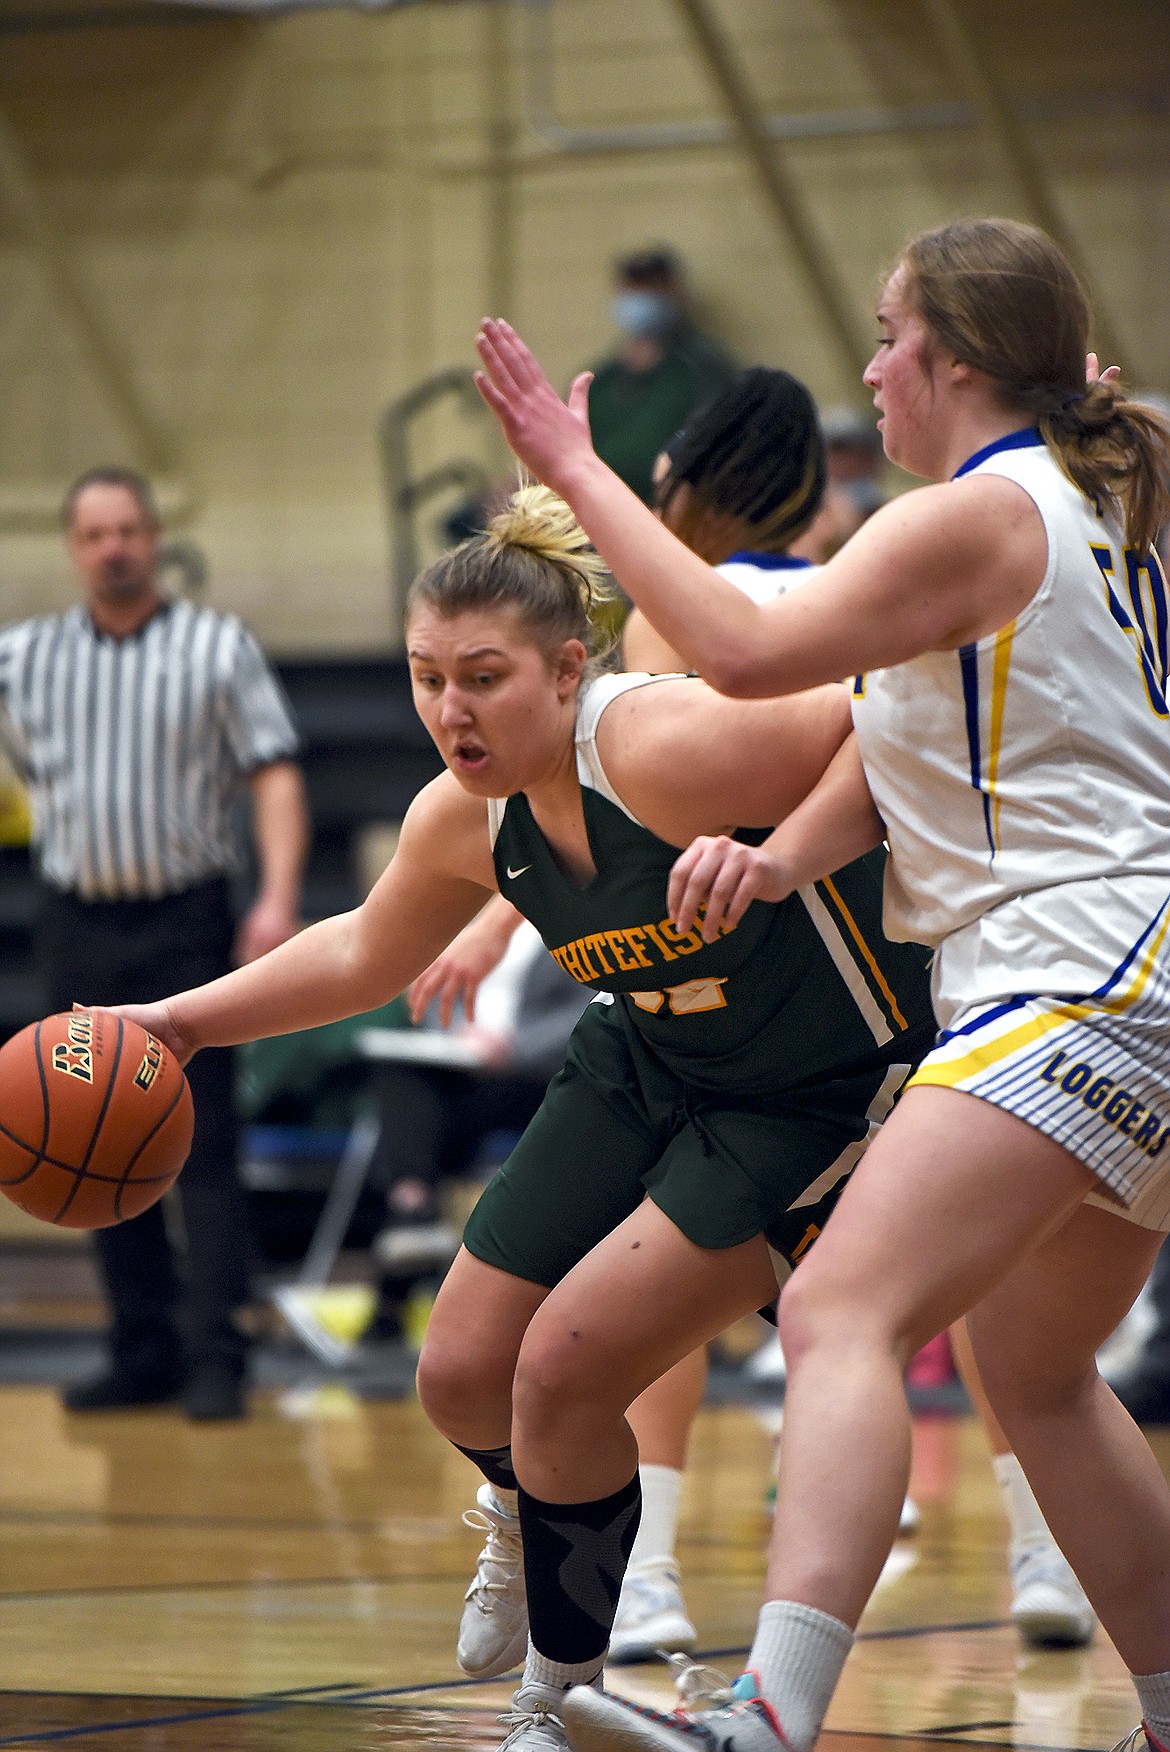 Whitefish senior Brook Smith drives into the paint during Thursday night's game against Libby. (Will Langhorne/The Western News)